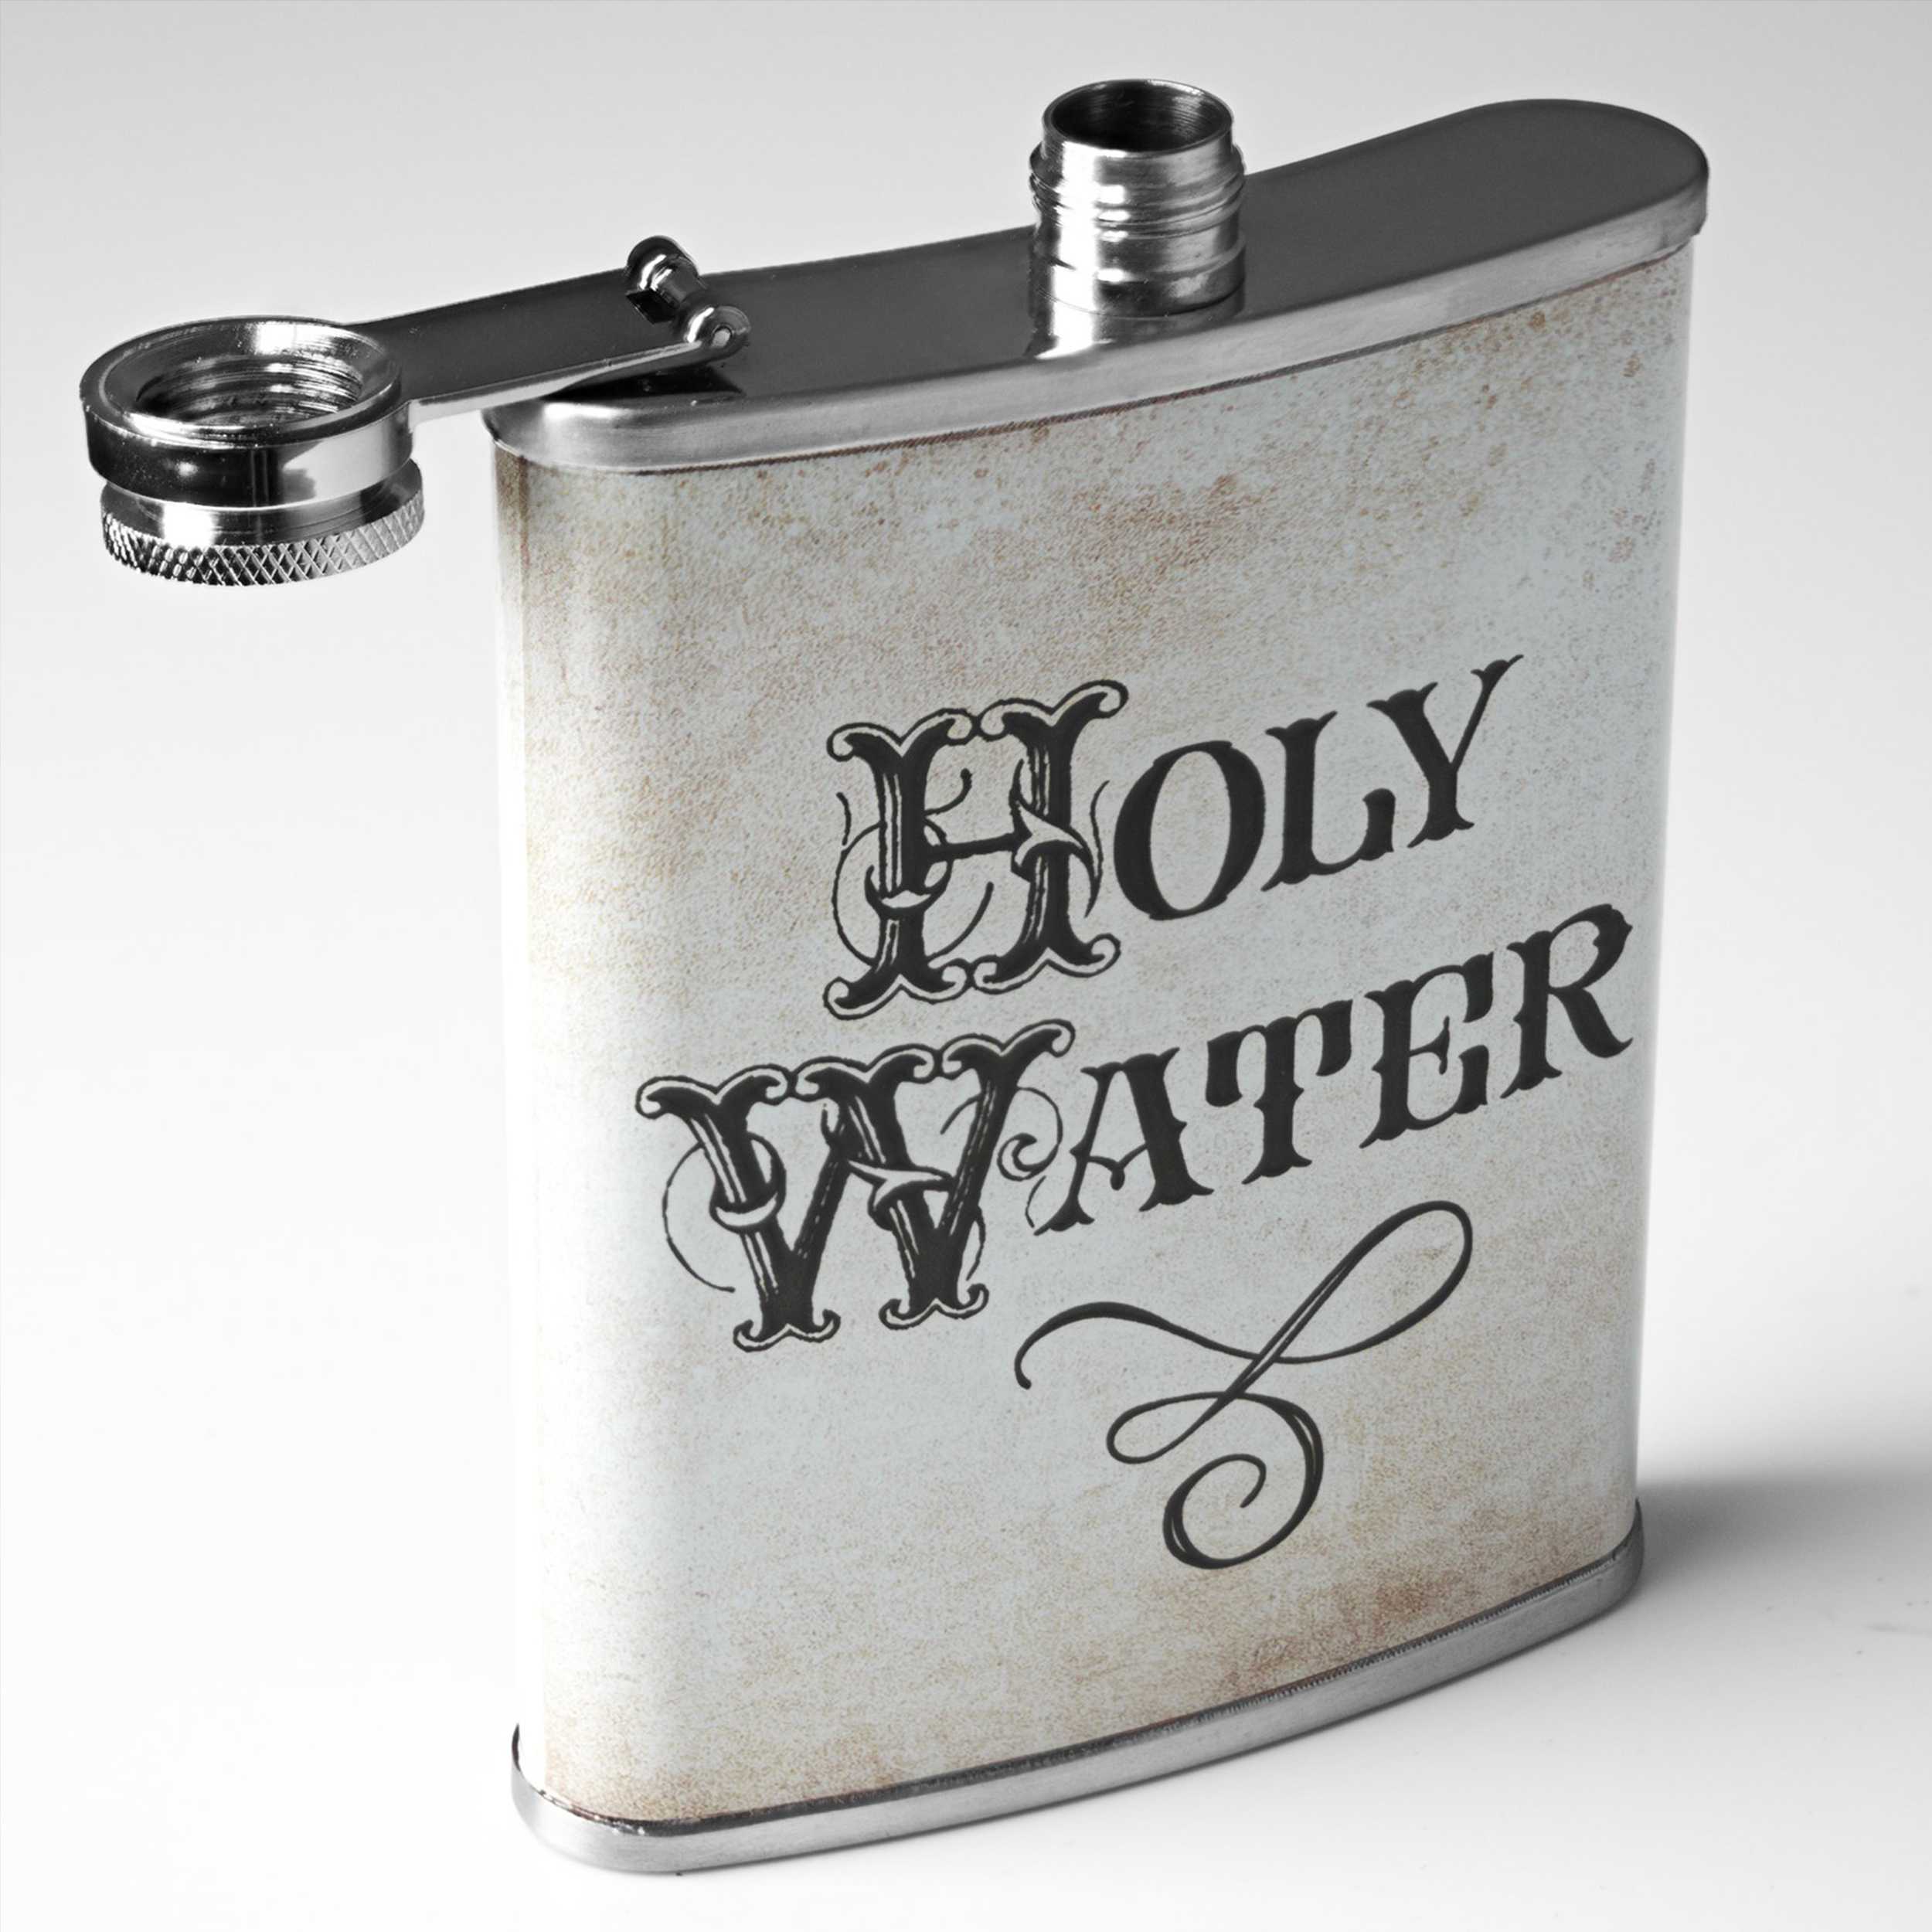 Stainless Steel Flask 8oz - Holy Water